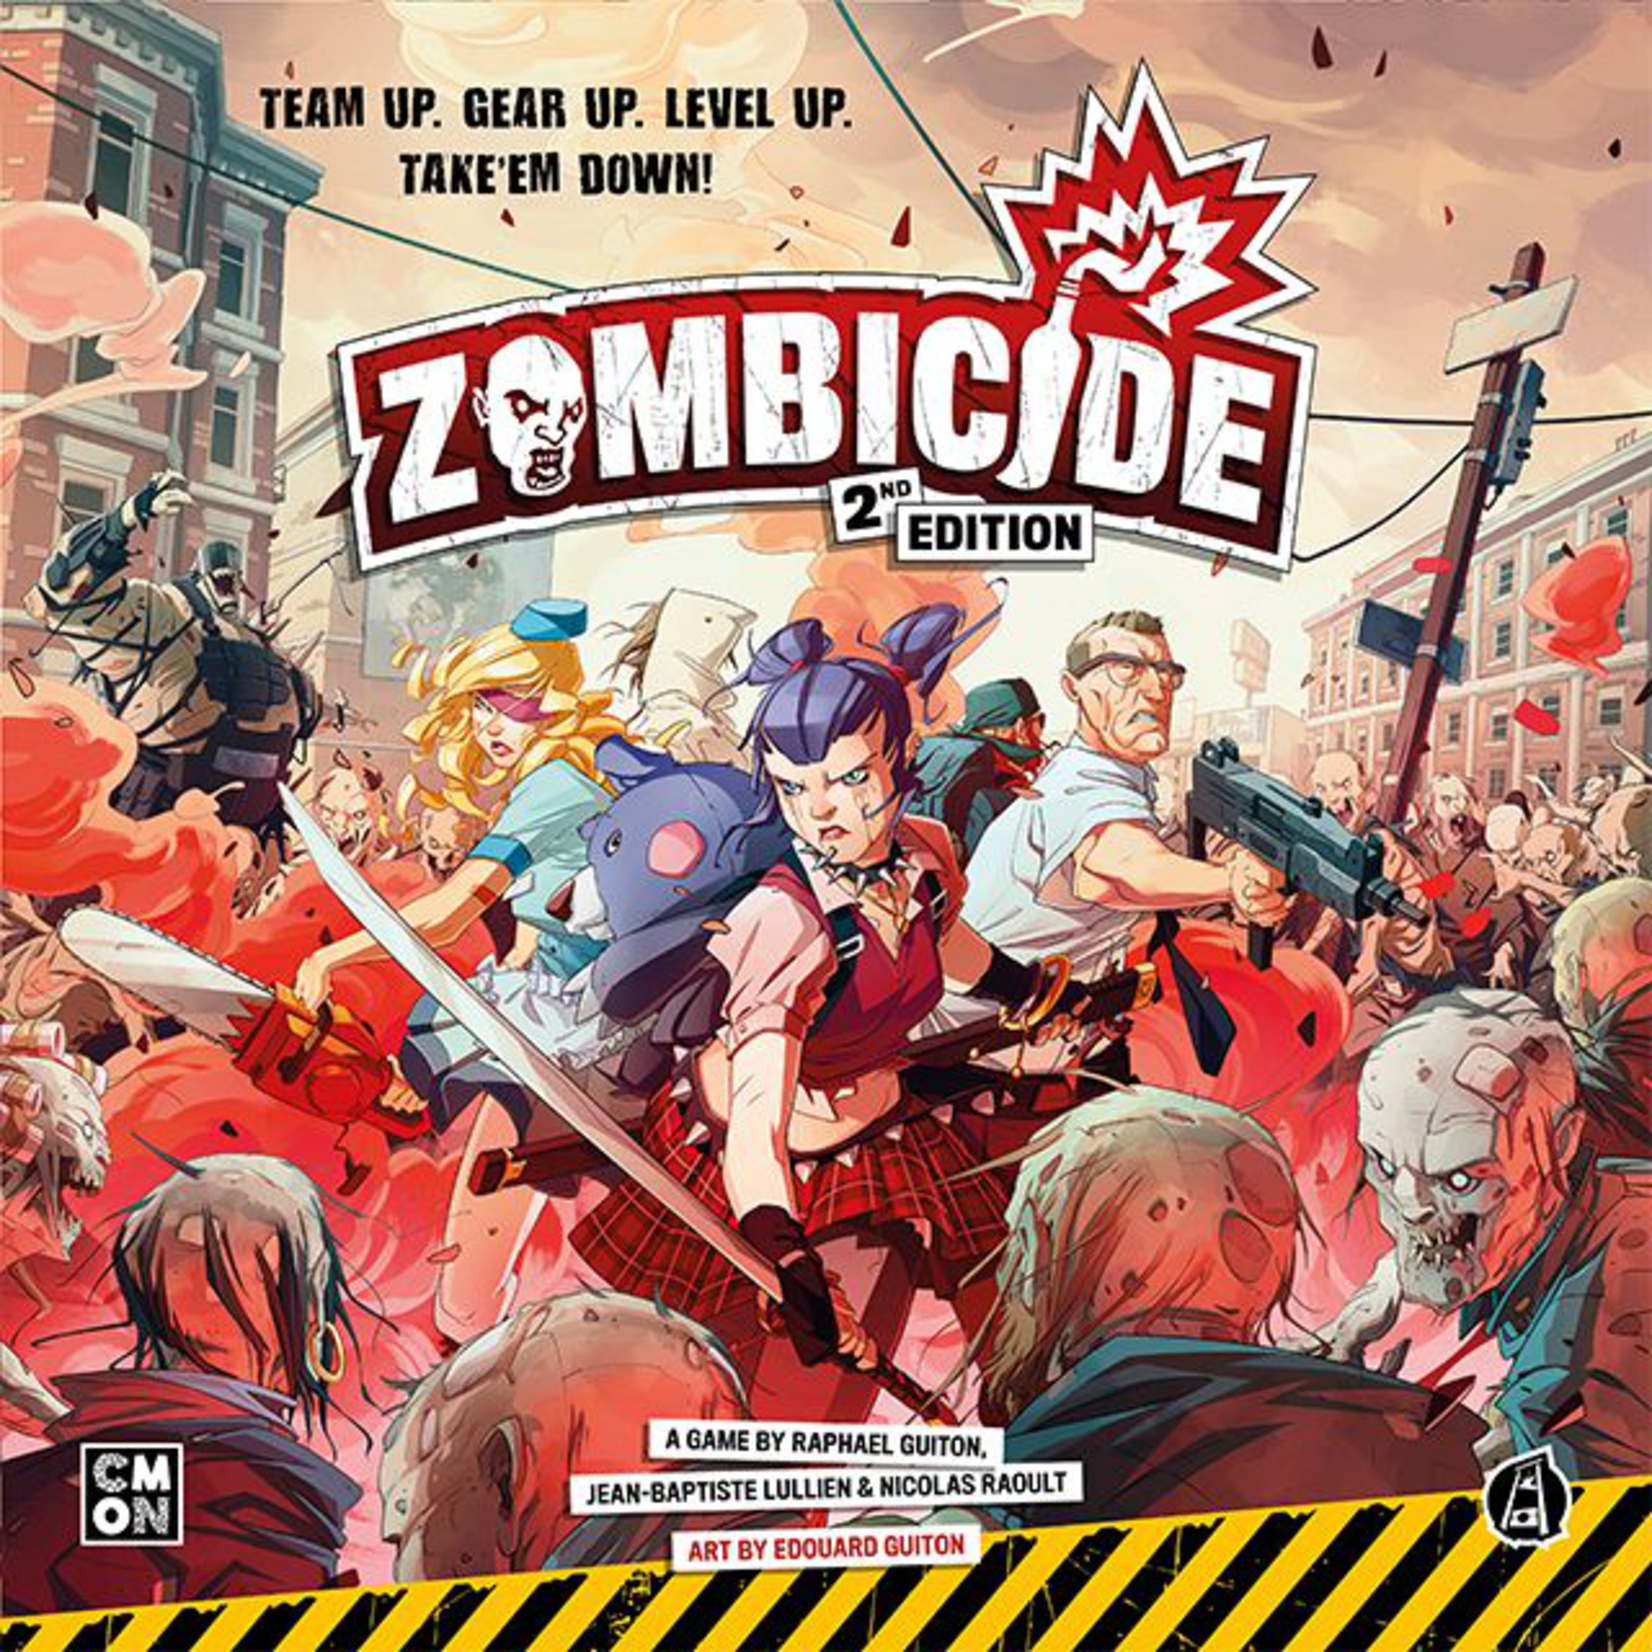 2nd edition arrived to swell the hoard : r/zombicide